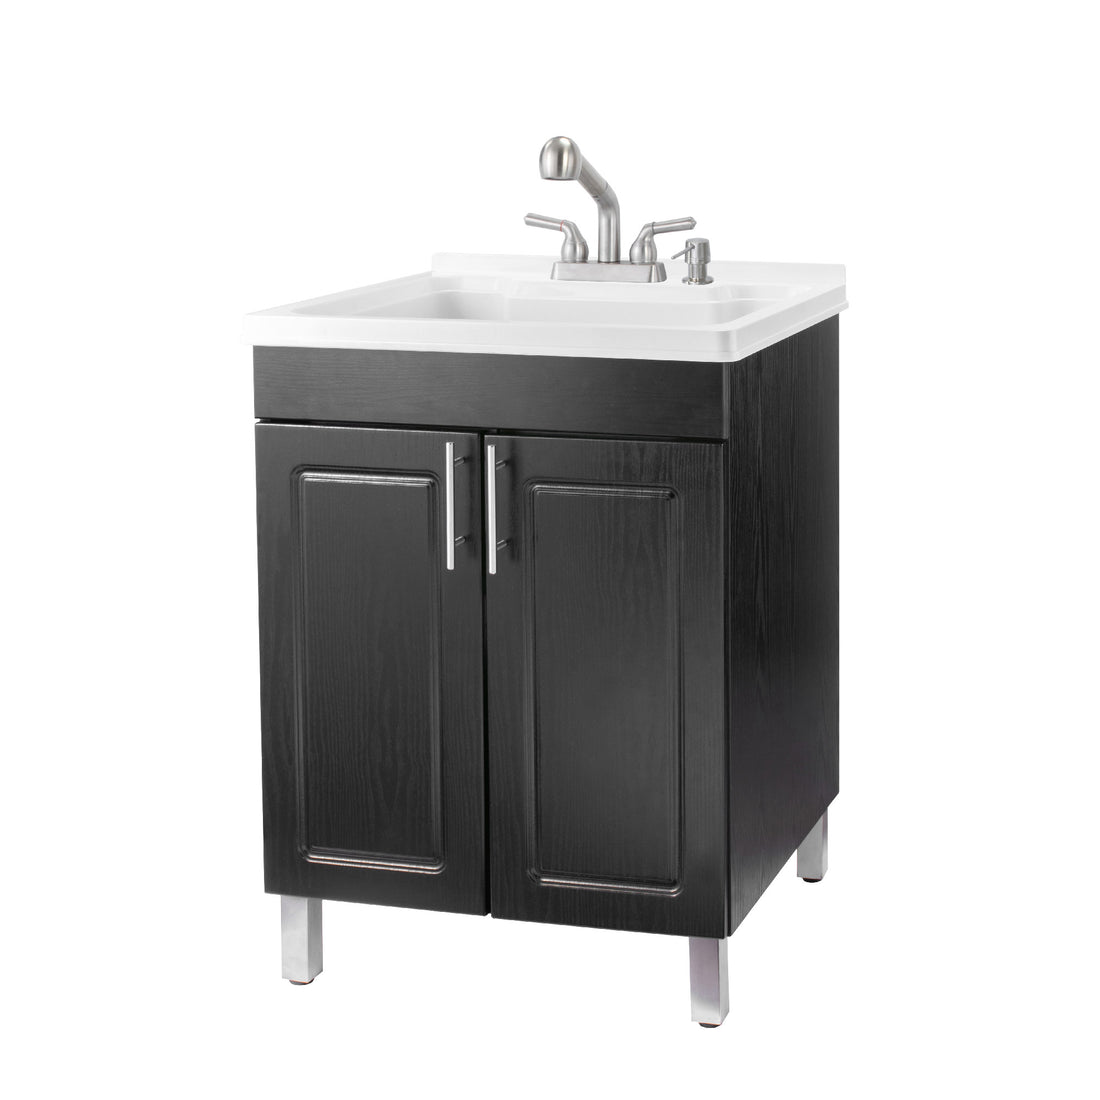 Tehila Black Vanity Cabinet and White Utility Sink with Stainless Steel Finish Pull-Out Faucet - Utility sinks vanites Tehila